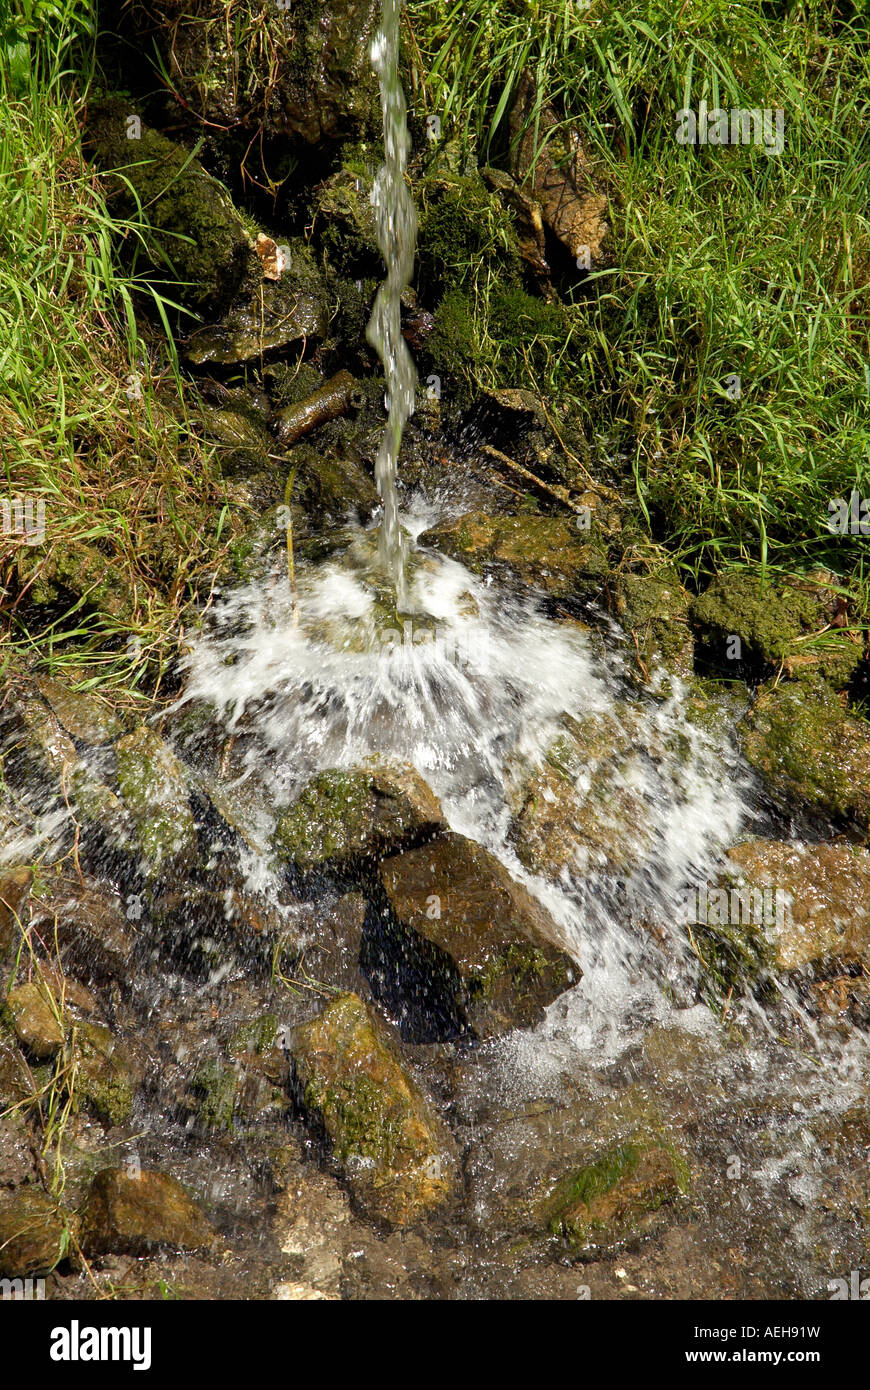 Stream of Water falling into a rocky stream bed Stock Photo